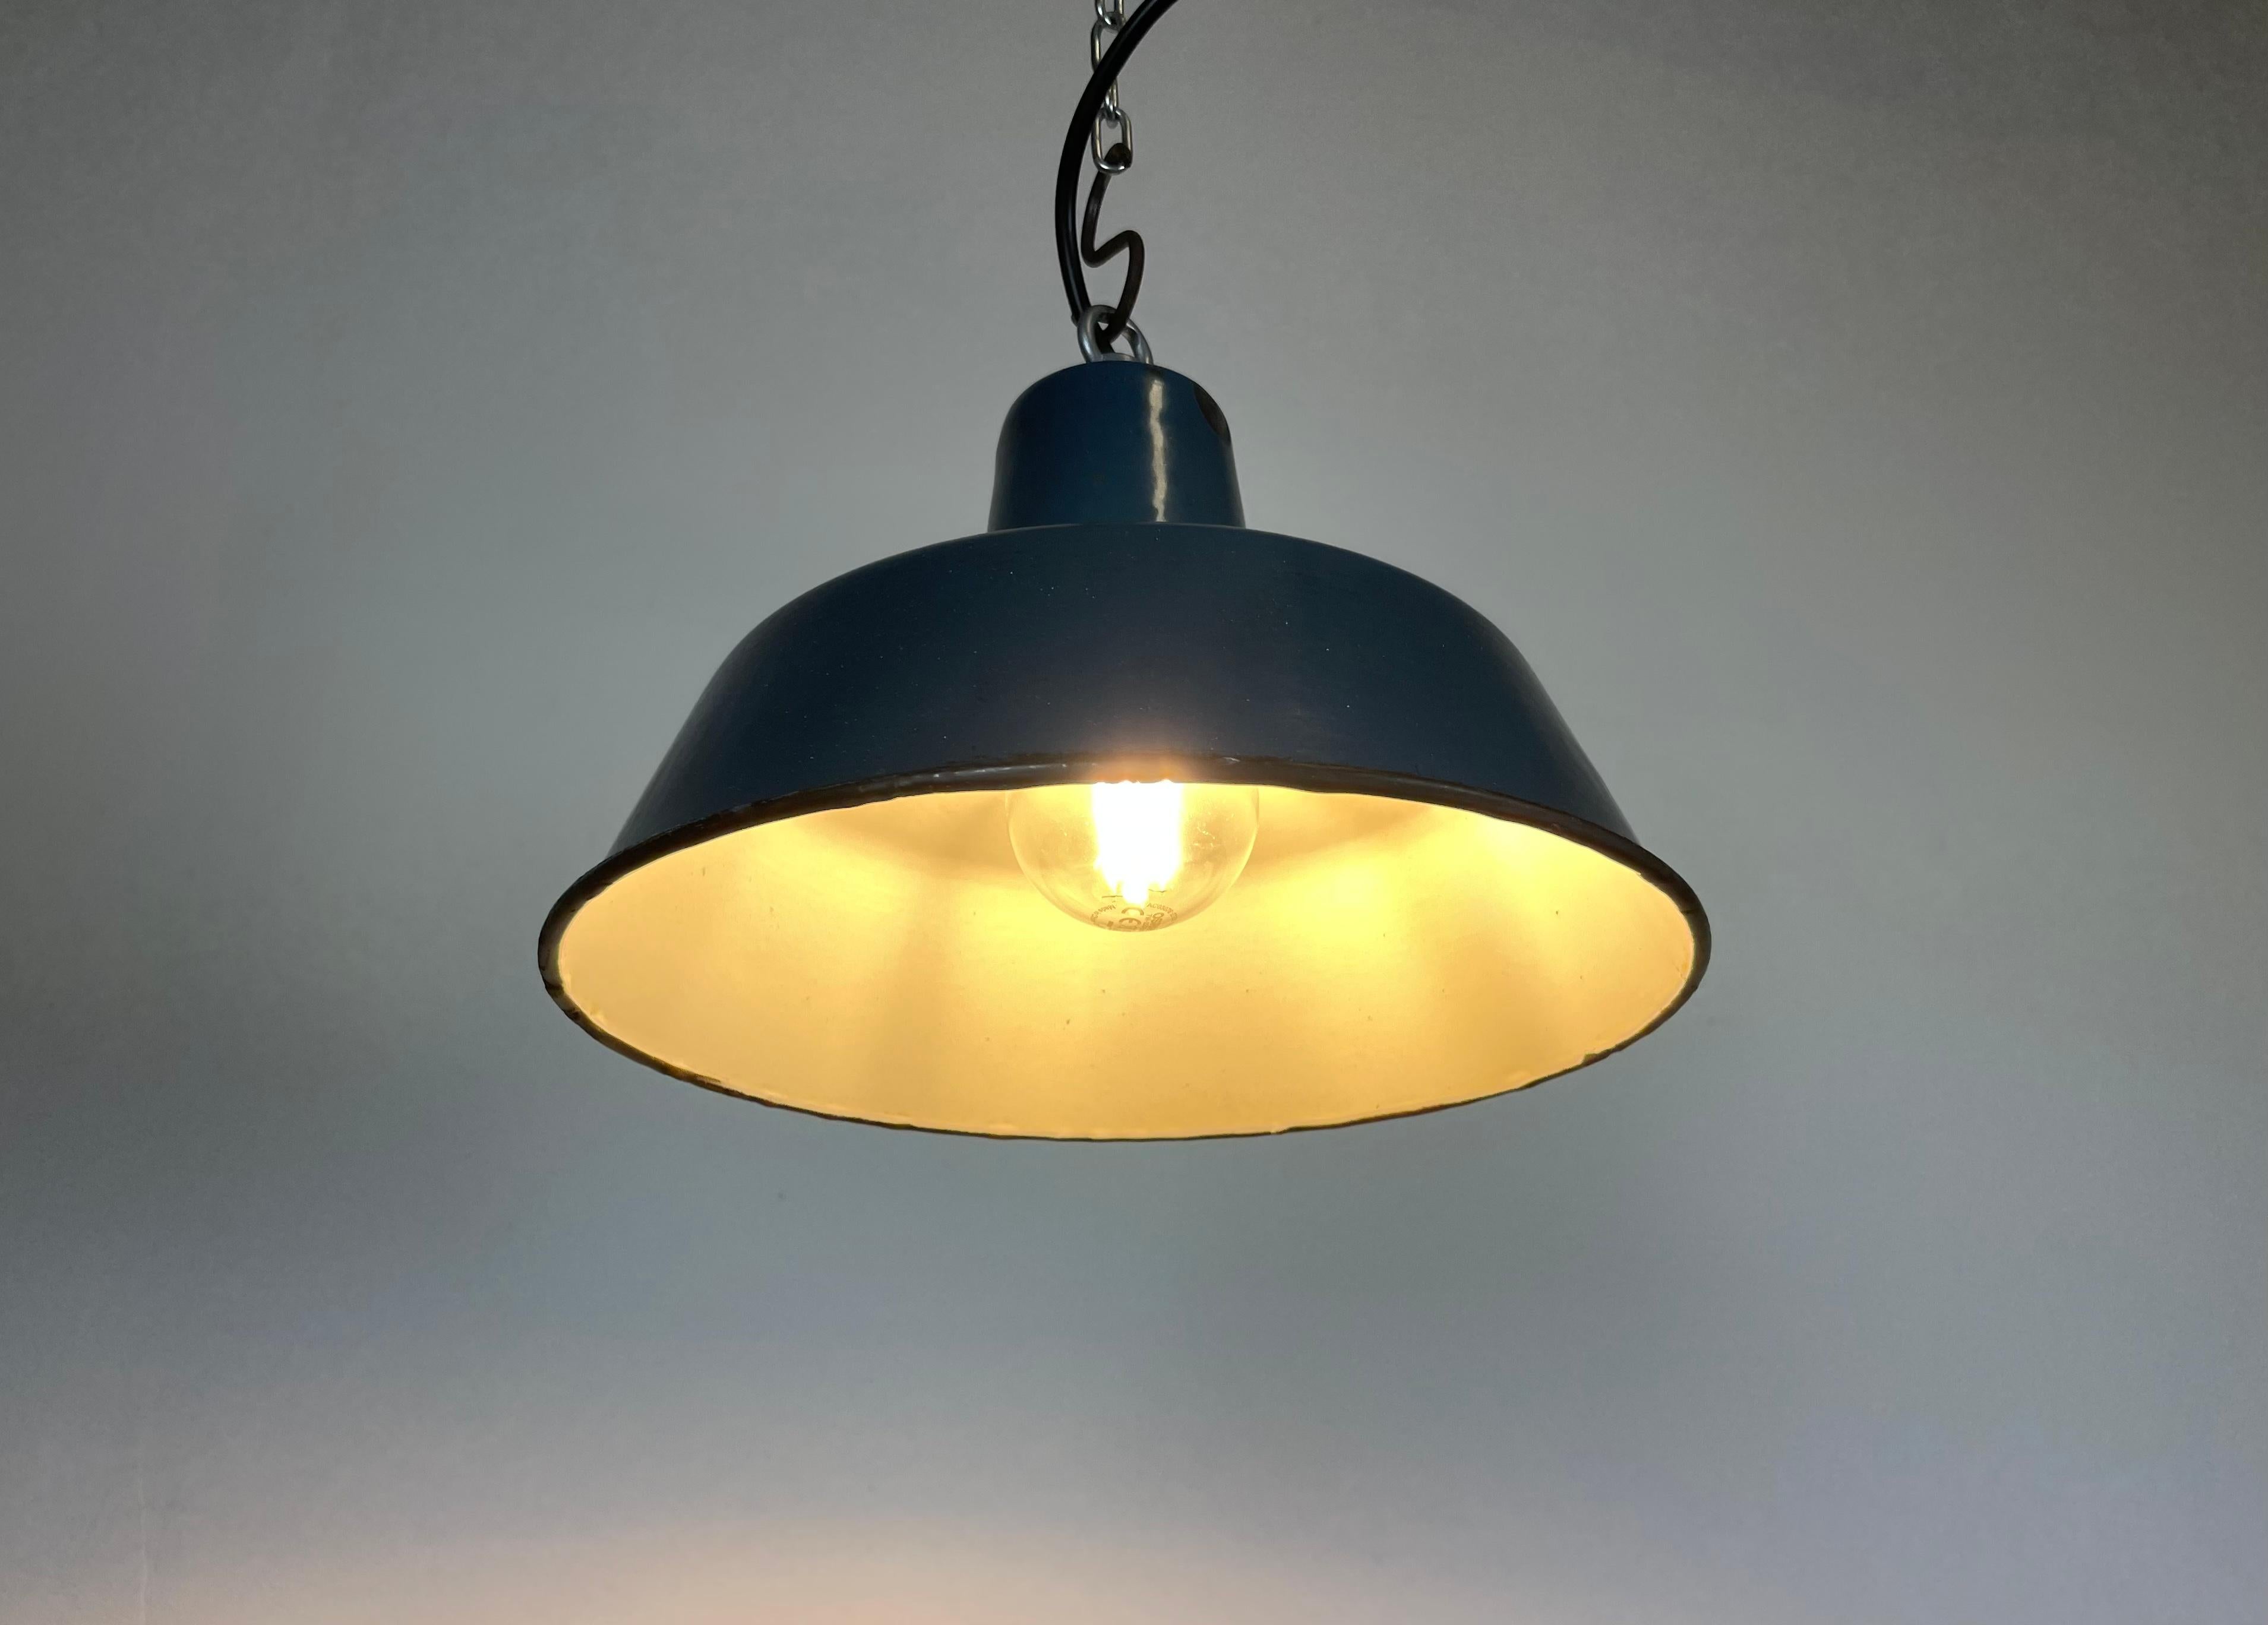 Small Industrial Blue Enamel Pendant Lamp, 1960s For Sale 4